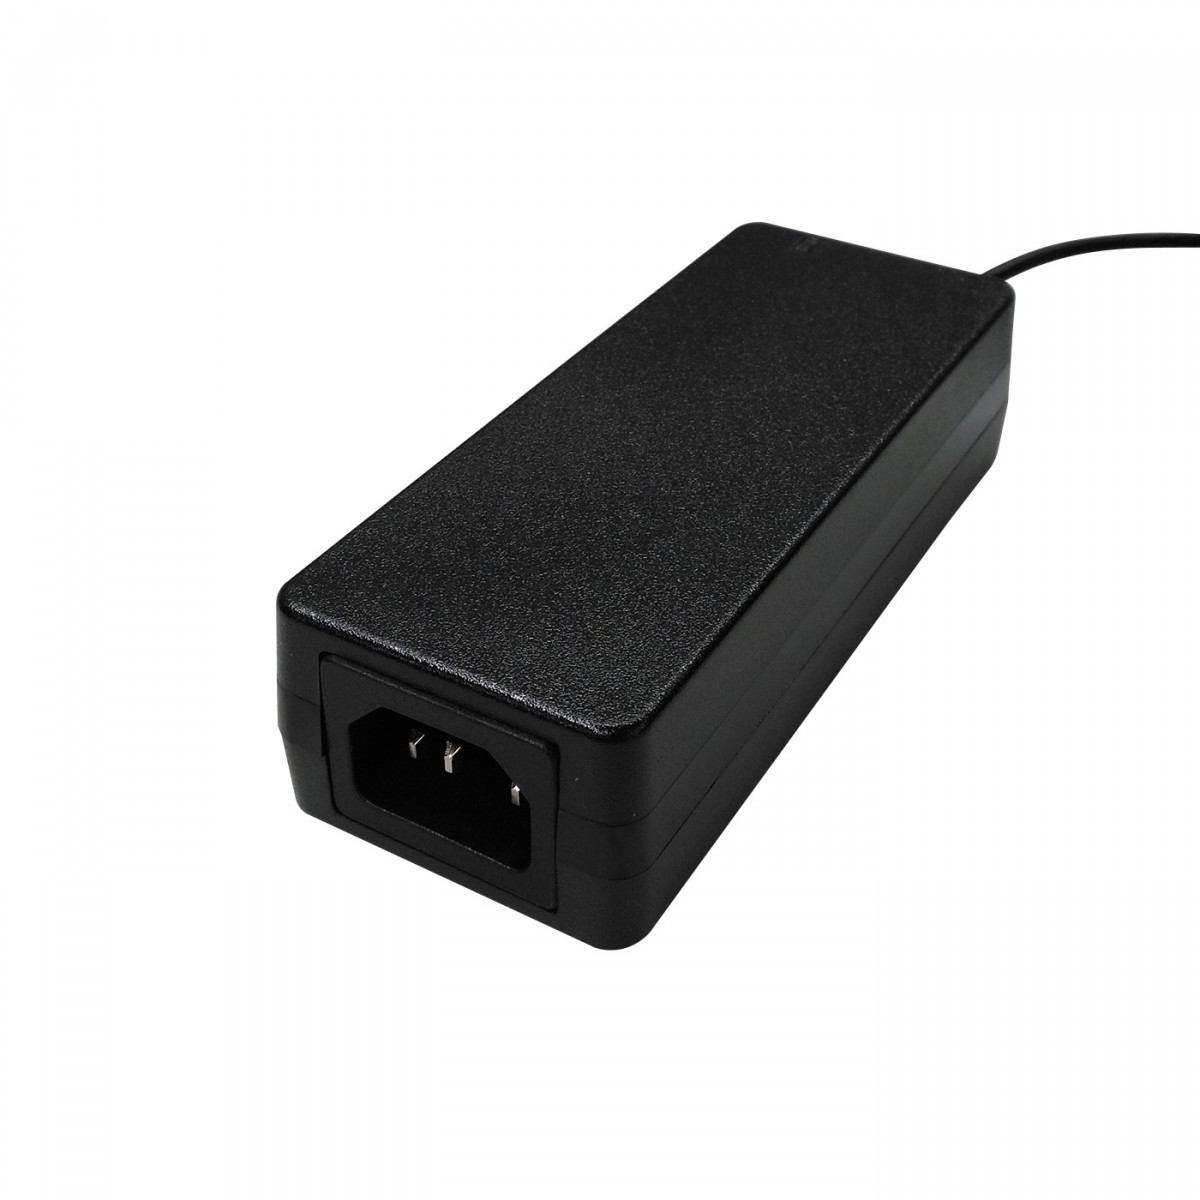 SEPURA 6-fold charger, 230 V, for device with rechargeable battery or single battery for Sepura STP8X 41800972